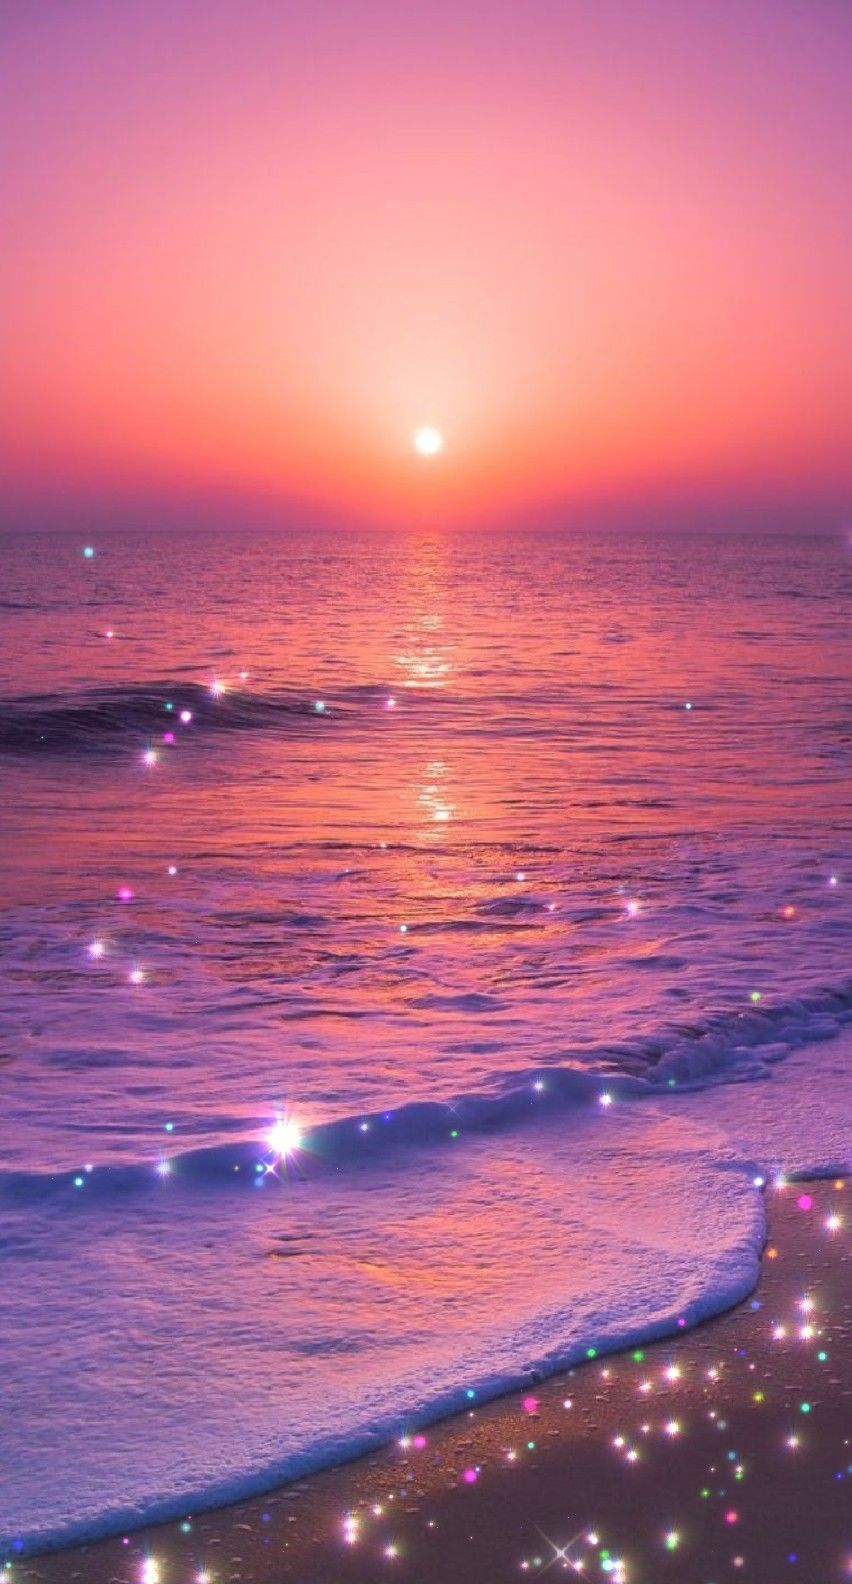 A beach with stars and the sun setting - Sunset, glitter